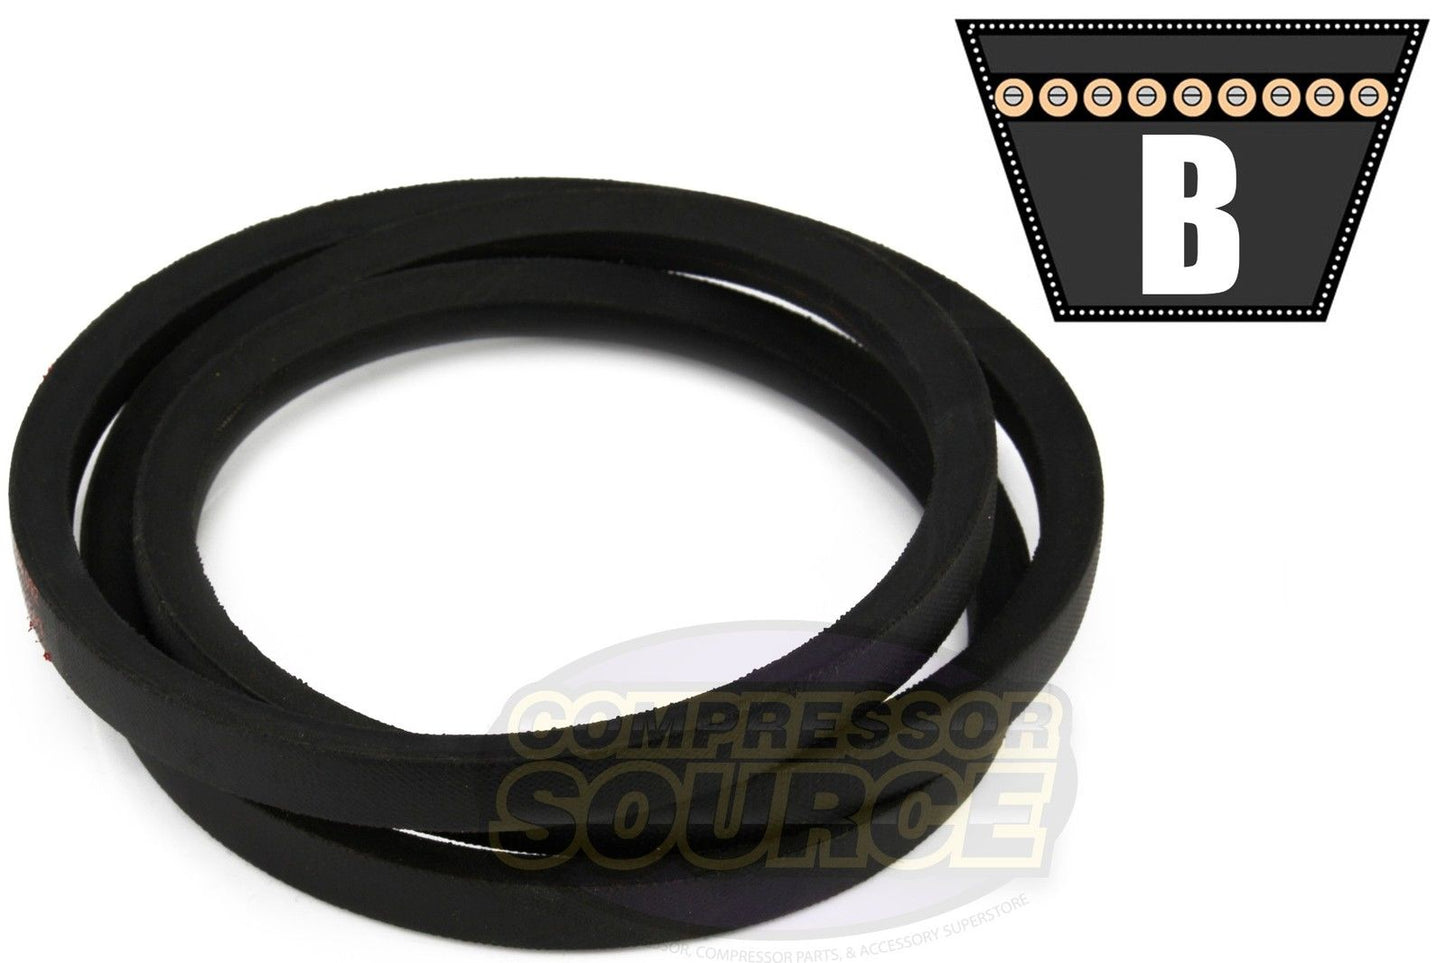 B73 Replacement High Quality Industrial & Lawn Mower 5/8" x 76"  V Belt 5L760